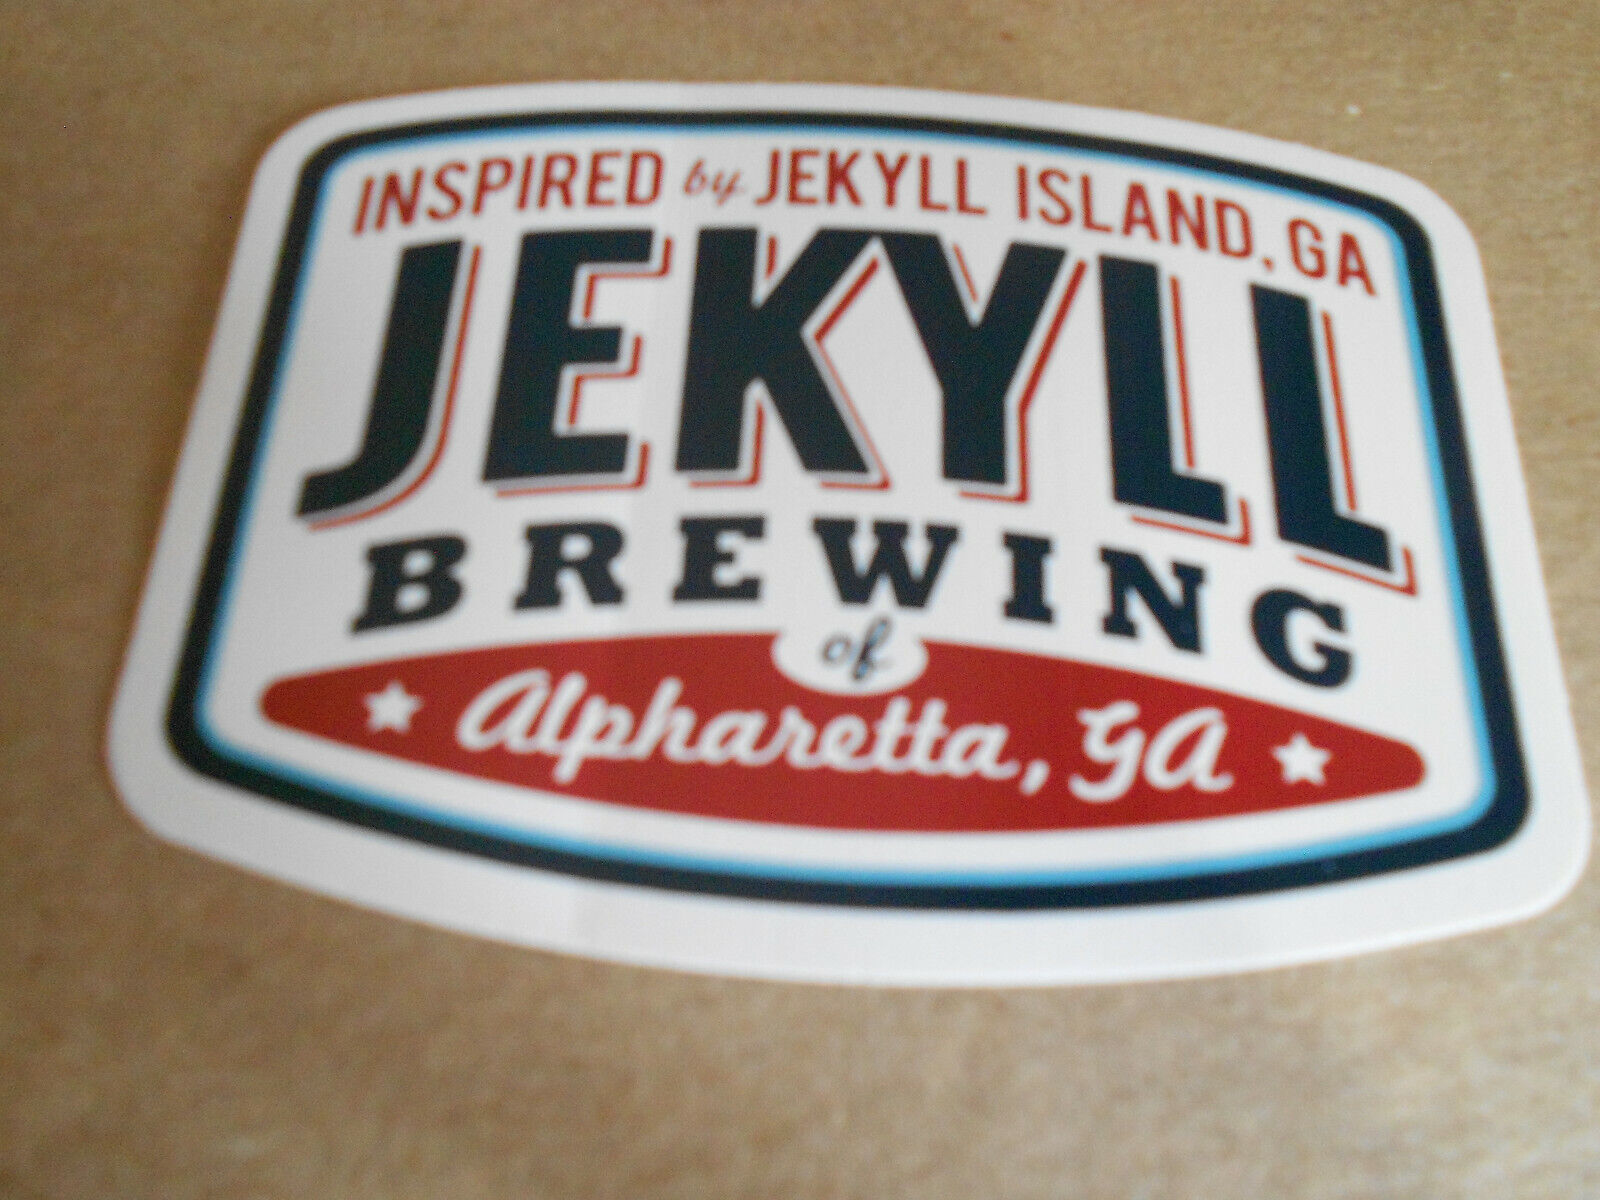 2 JEKYLL BREWING Georgia STICKER decal craft beer brewery-perfect / new